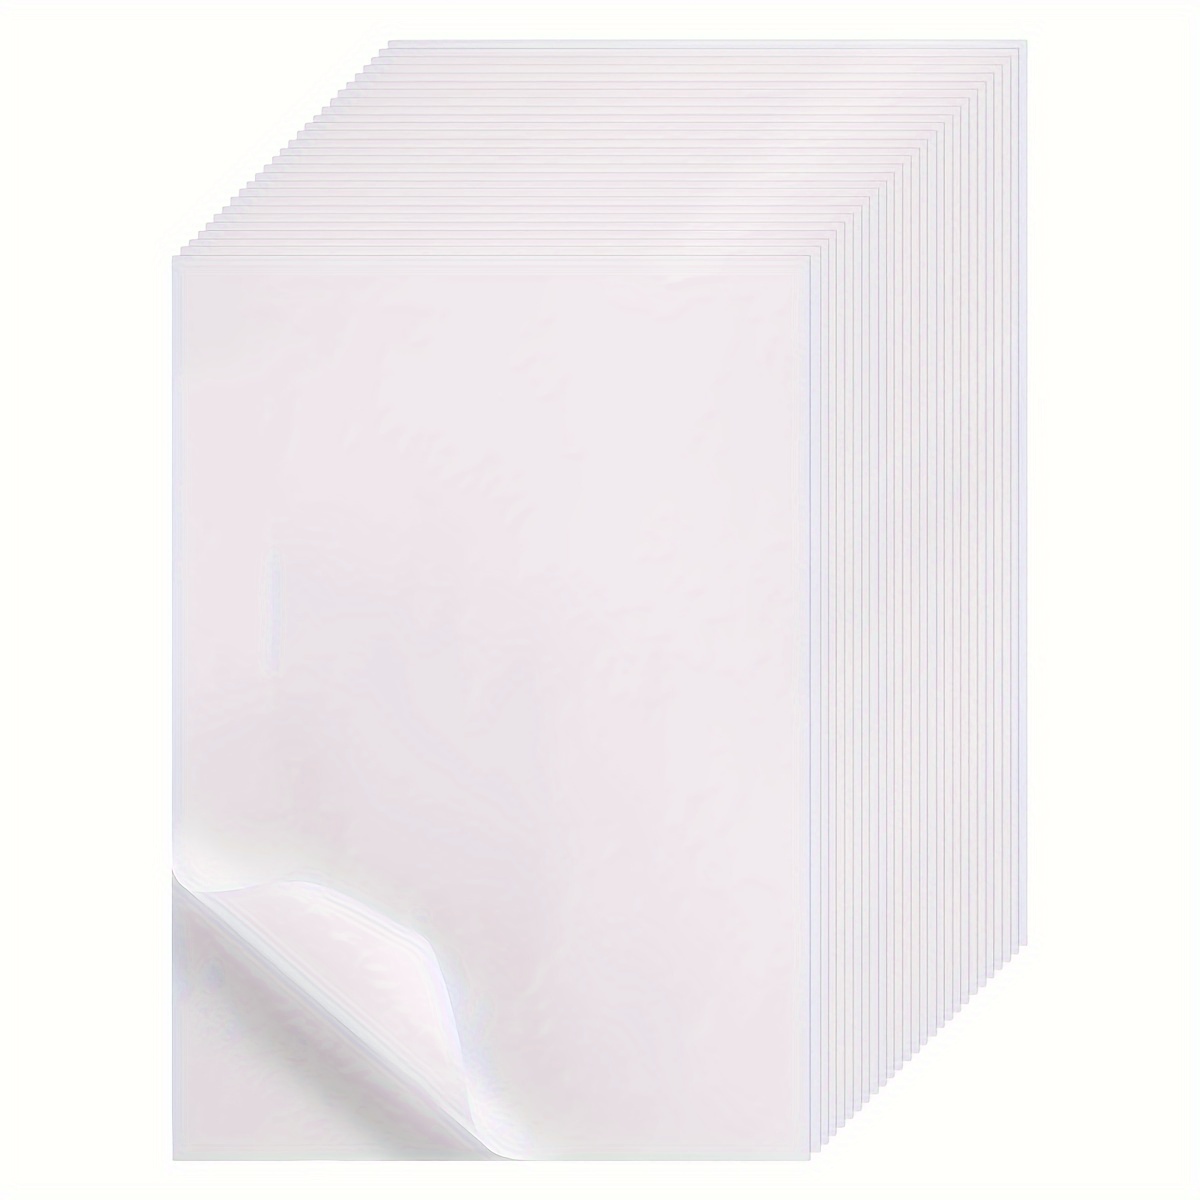 100 Pcs Tracing Paper, A4 Size Artists Tracing Paper Trace Paper White Translucent Sketching Tracing Paper Calligraphy Architecture Transfer Paper for